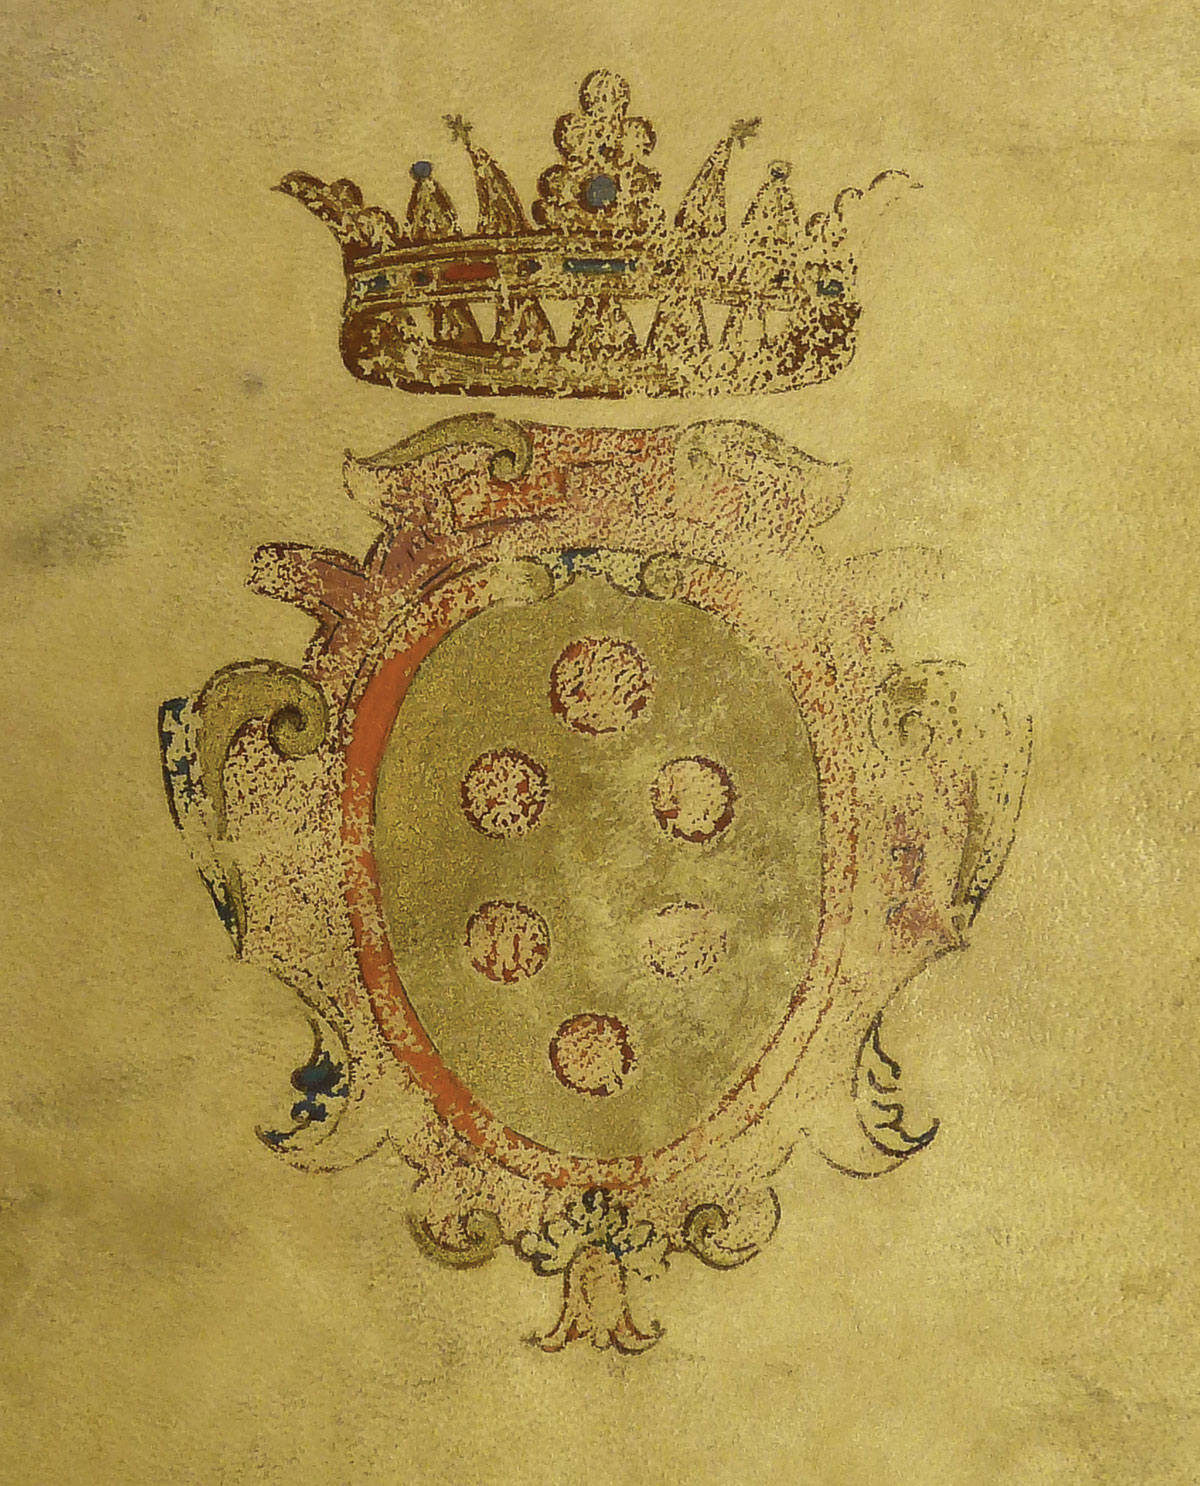 A photograph of the Medici coat of arms on a sixteen sixty book owned by the family.